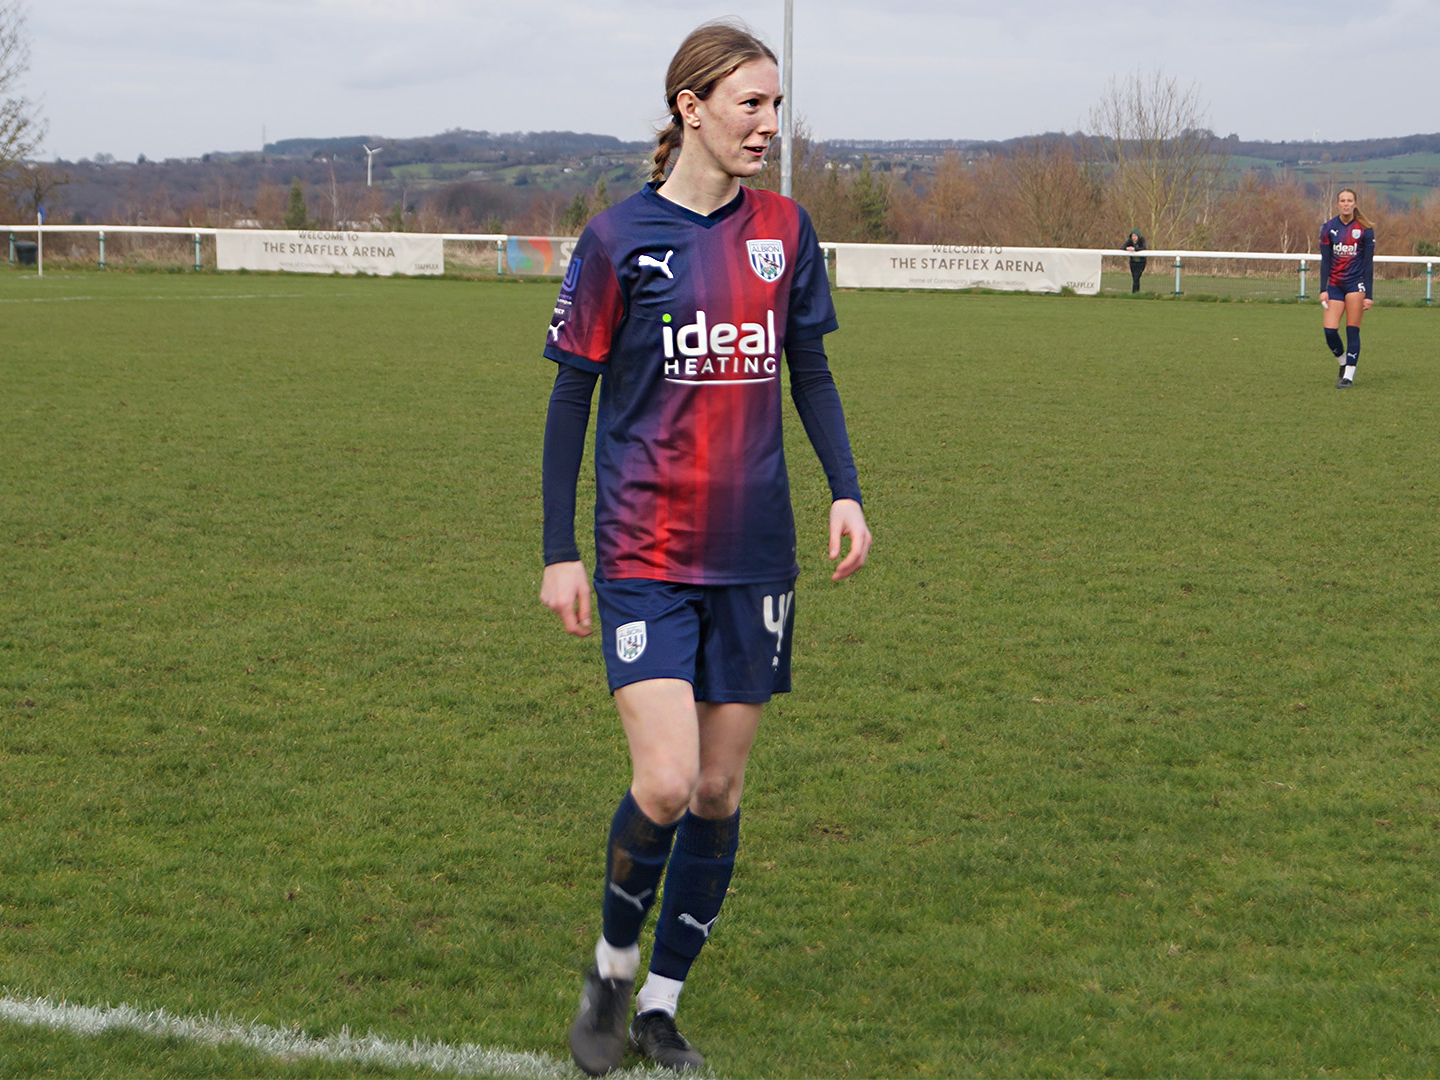 An image of Jess Reavill playing against Huddersfield